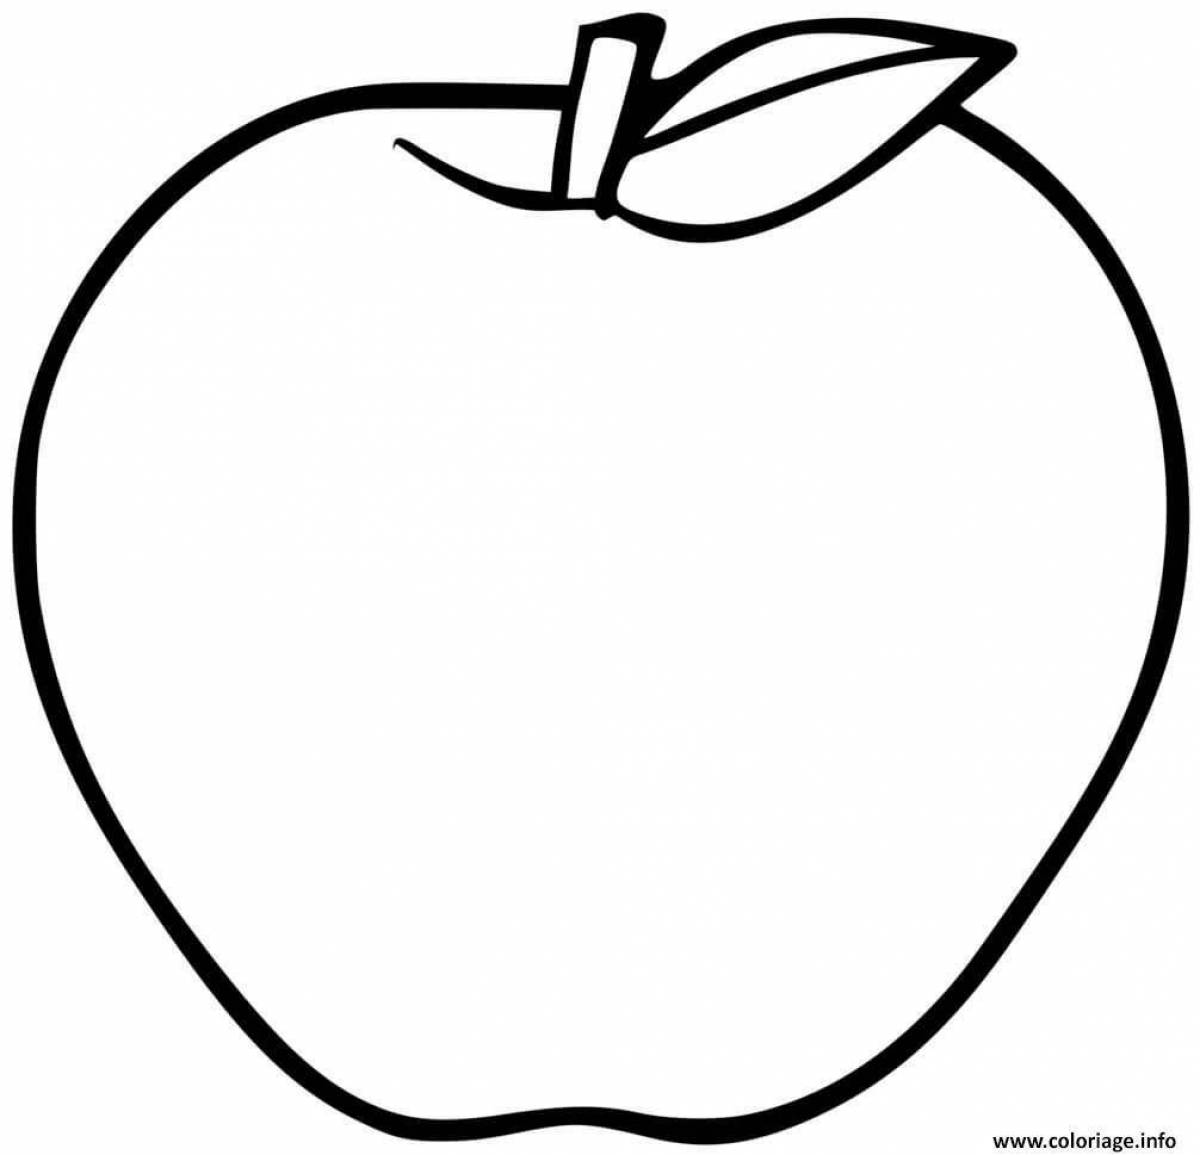 Sweet apple coloring book for kids